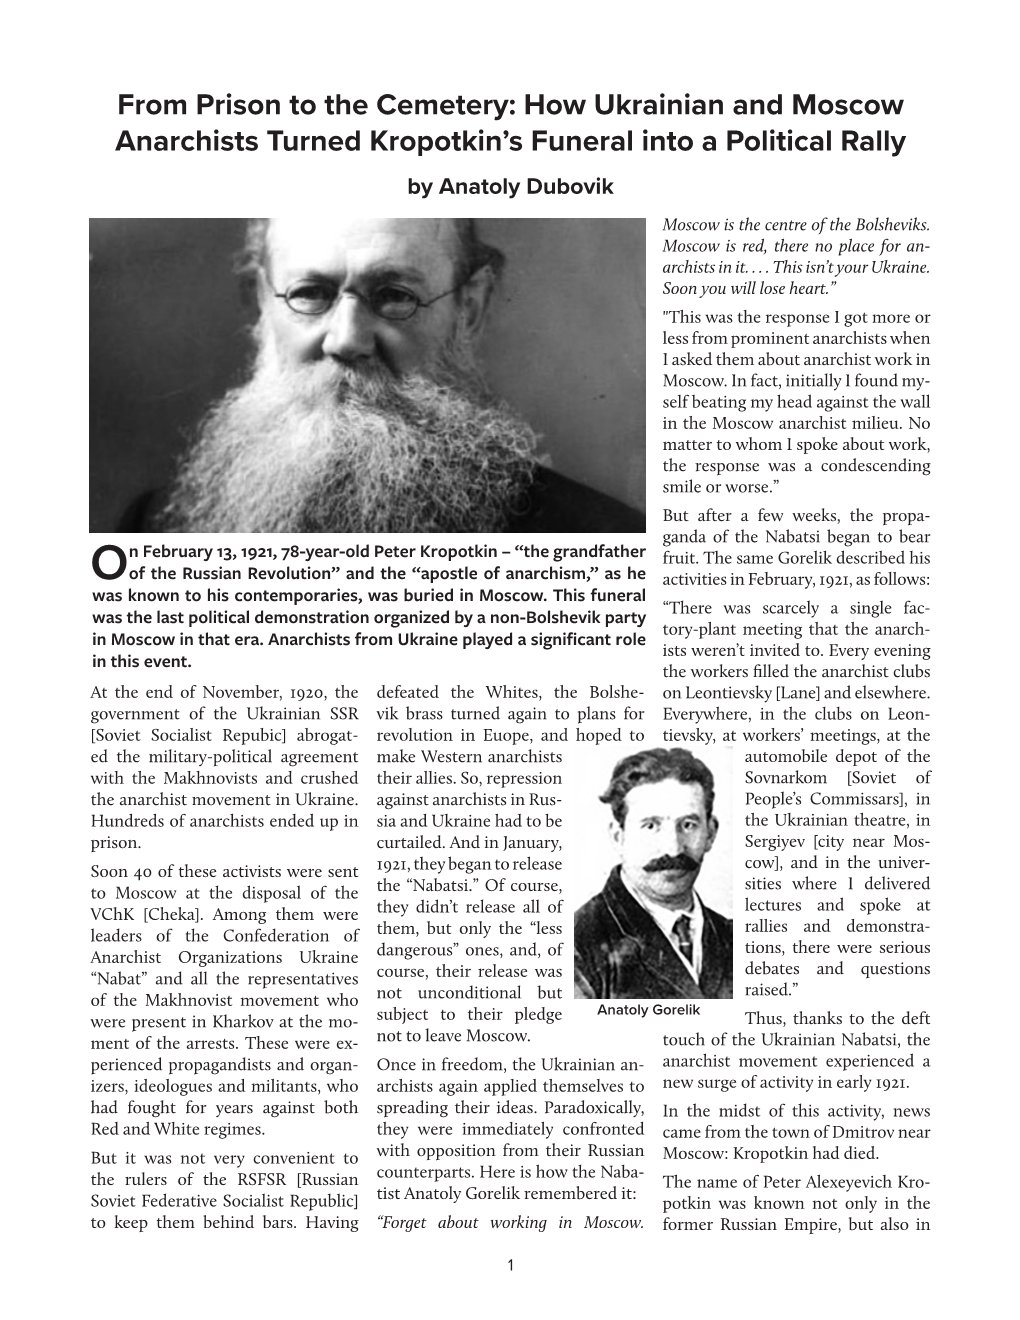 On February 13, 1921, 78-Year-Old Peter Kropotkin